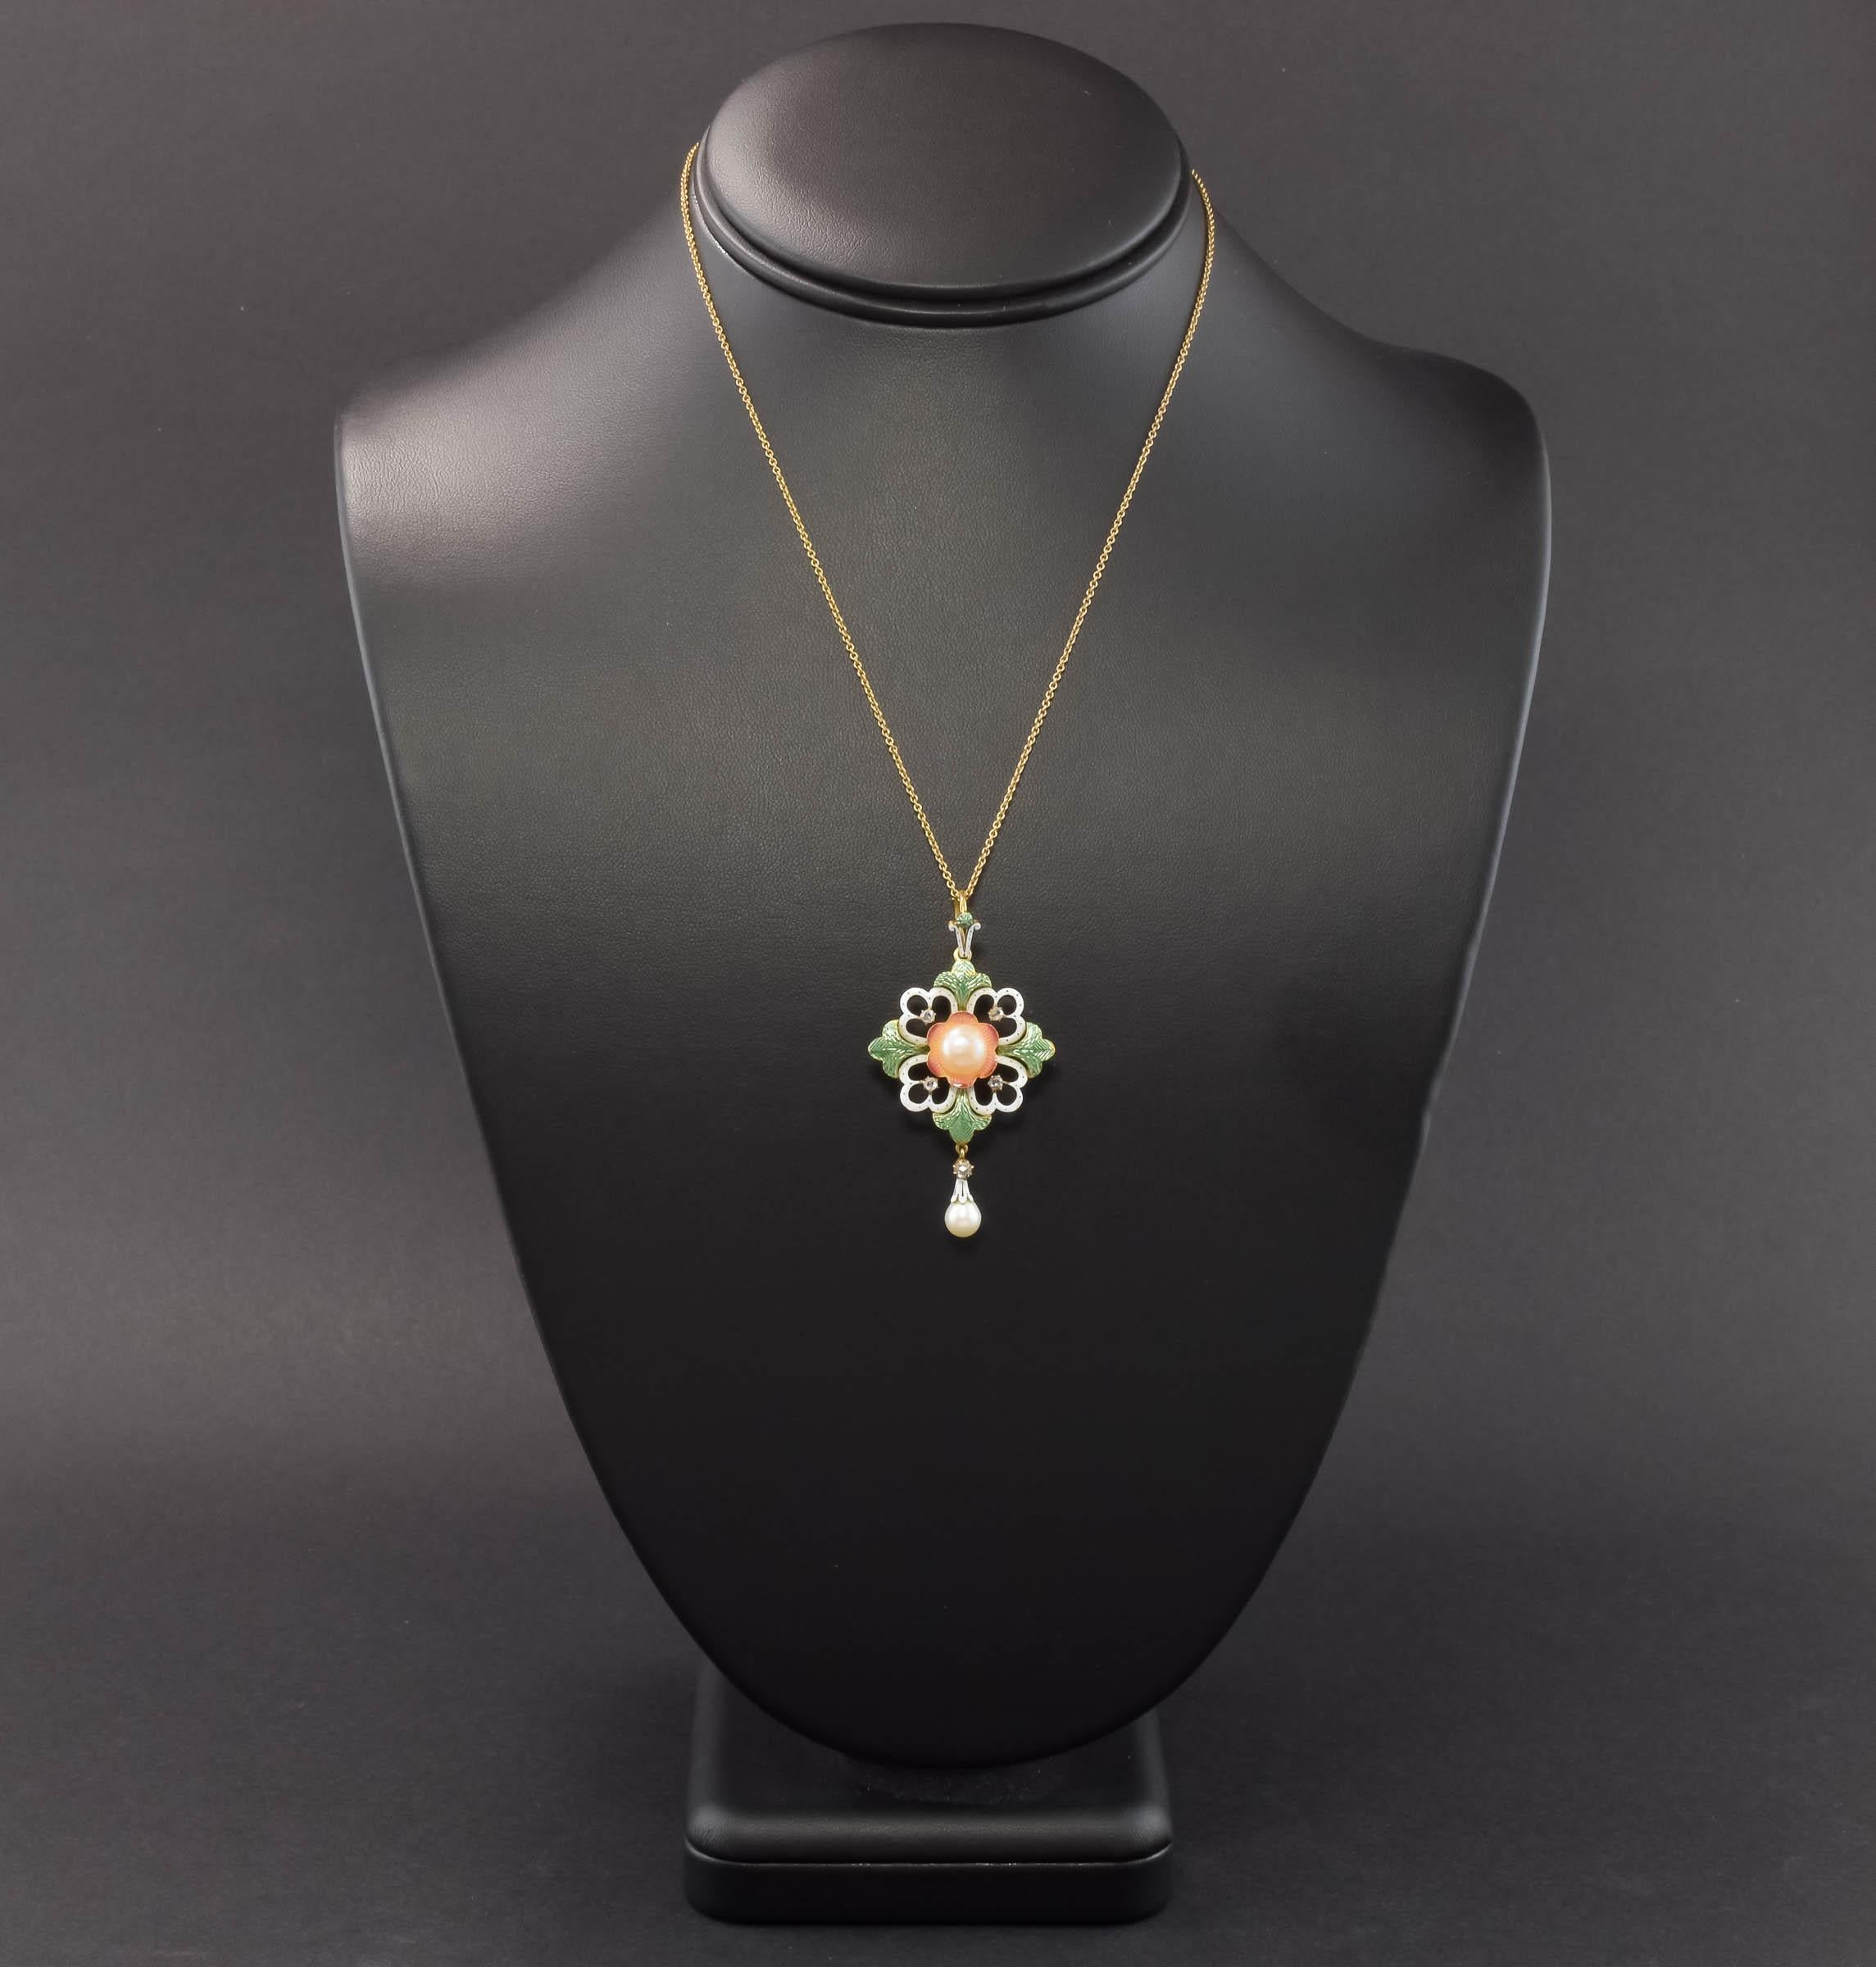 Offered is a beautifully detailed Art Nouveau period enamel Pendant - Brooch Necklace.  Set with rose cut diamonds & pearls, this floral/foliate motif piece offers elegance, fine workmanship and versatility.  (the decorative bail may be removed, and